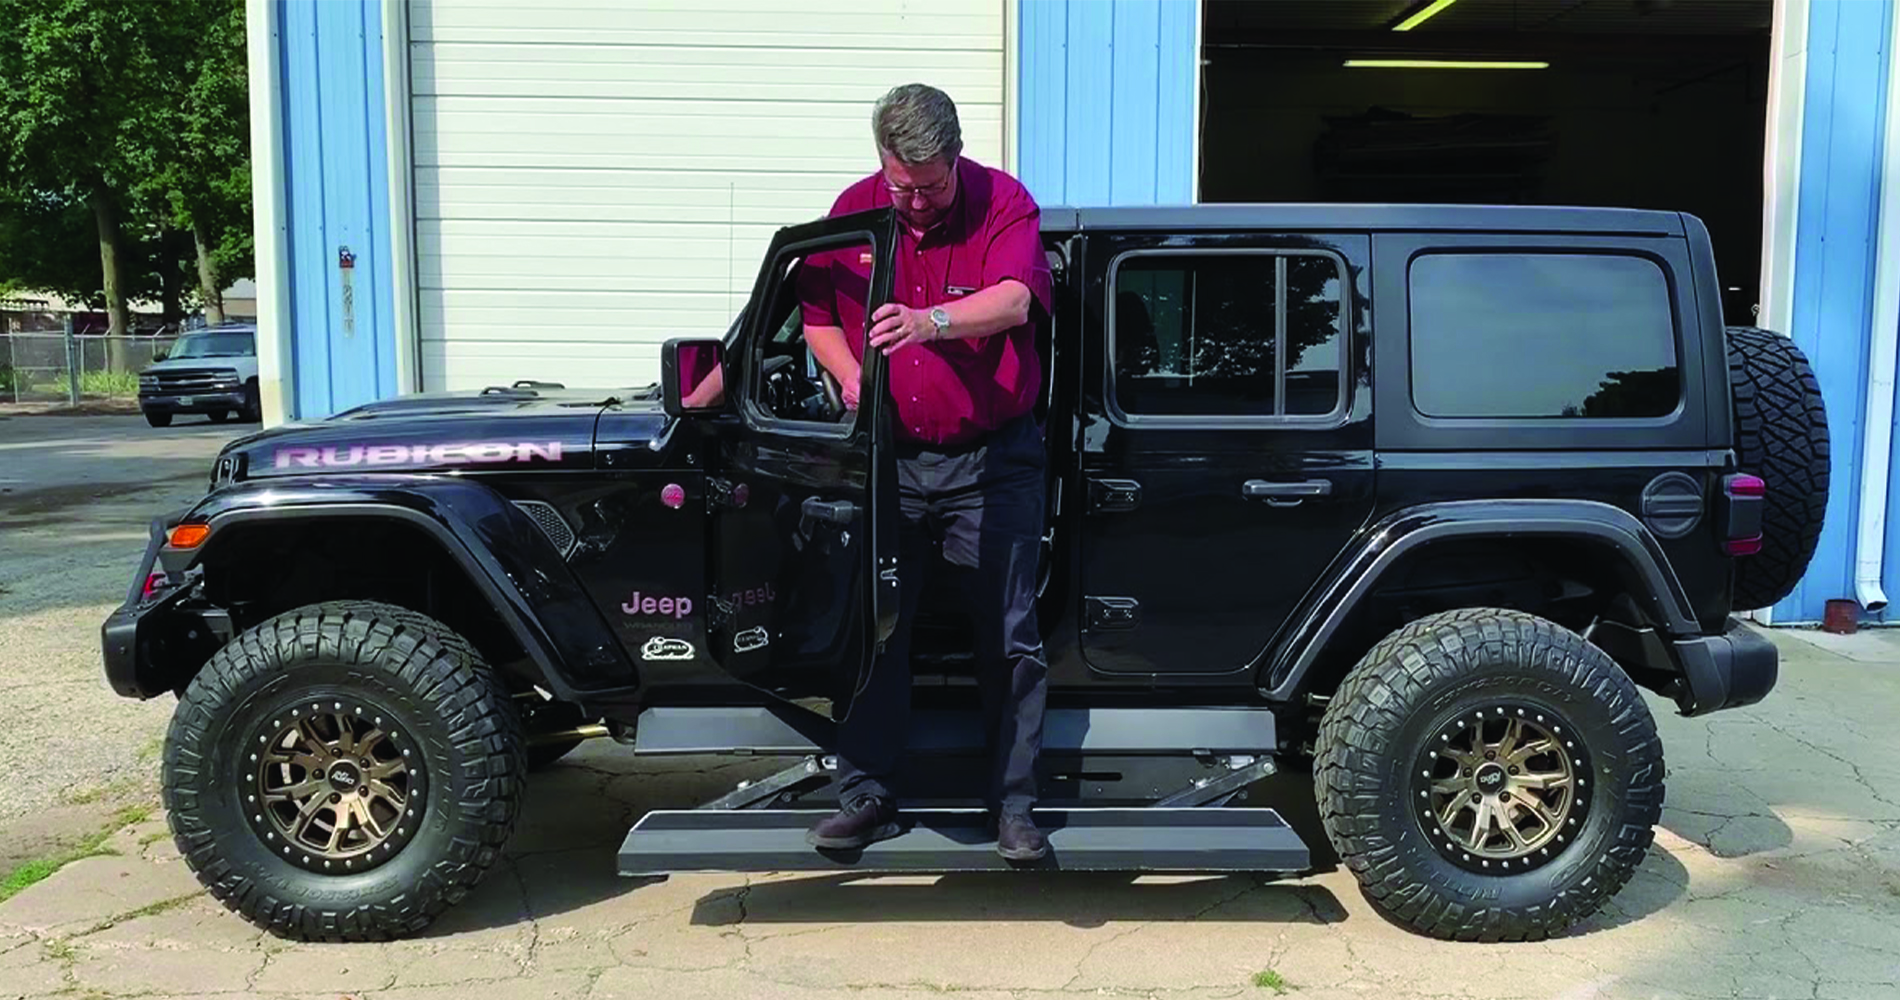 Driver testing electric running boards on a black Jeep Rubicon